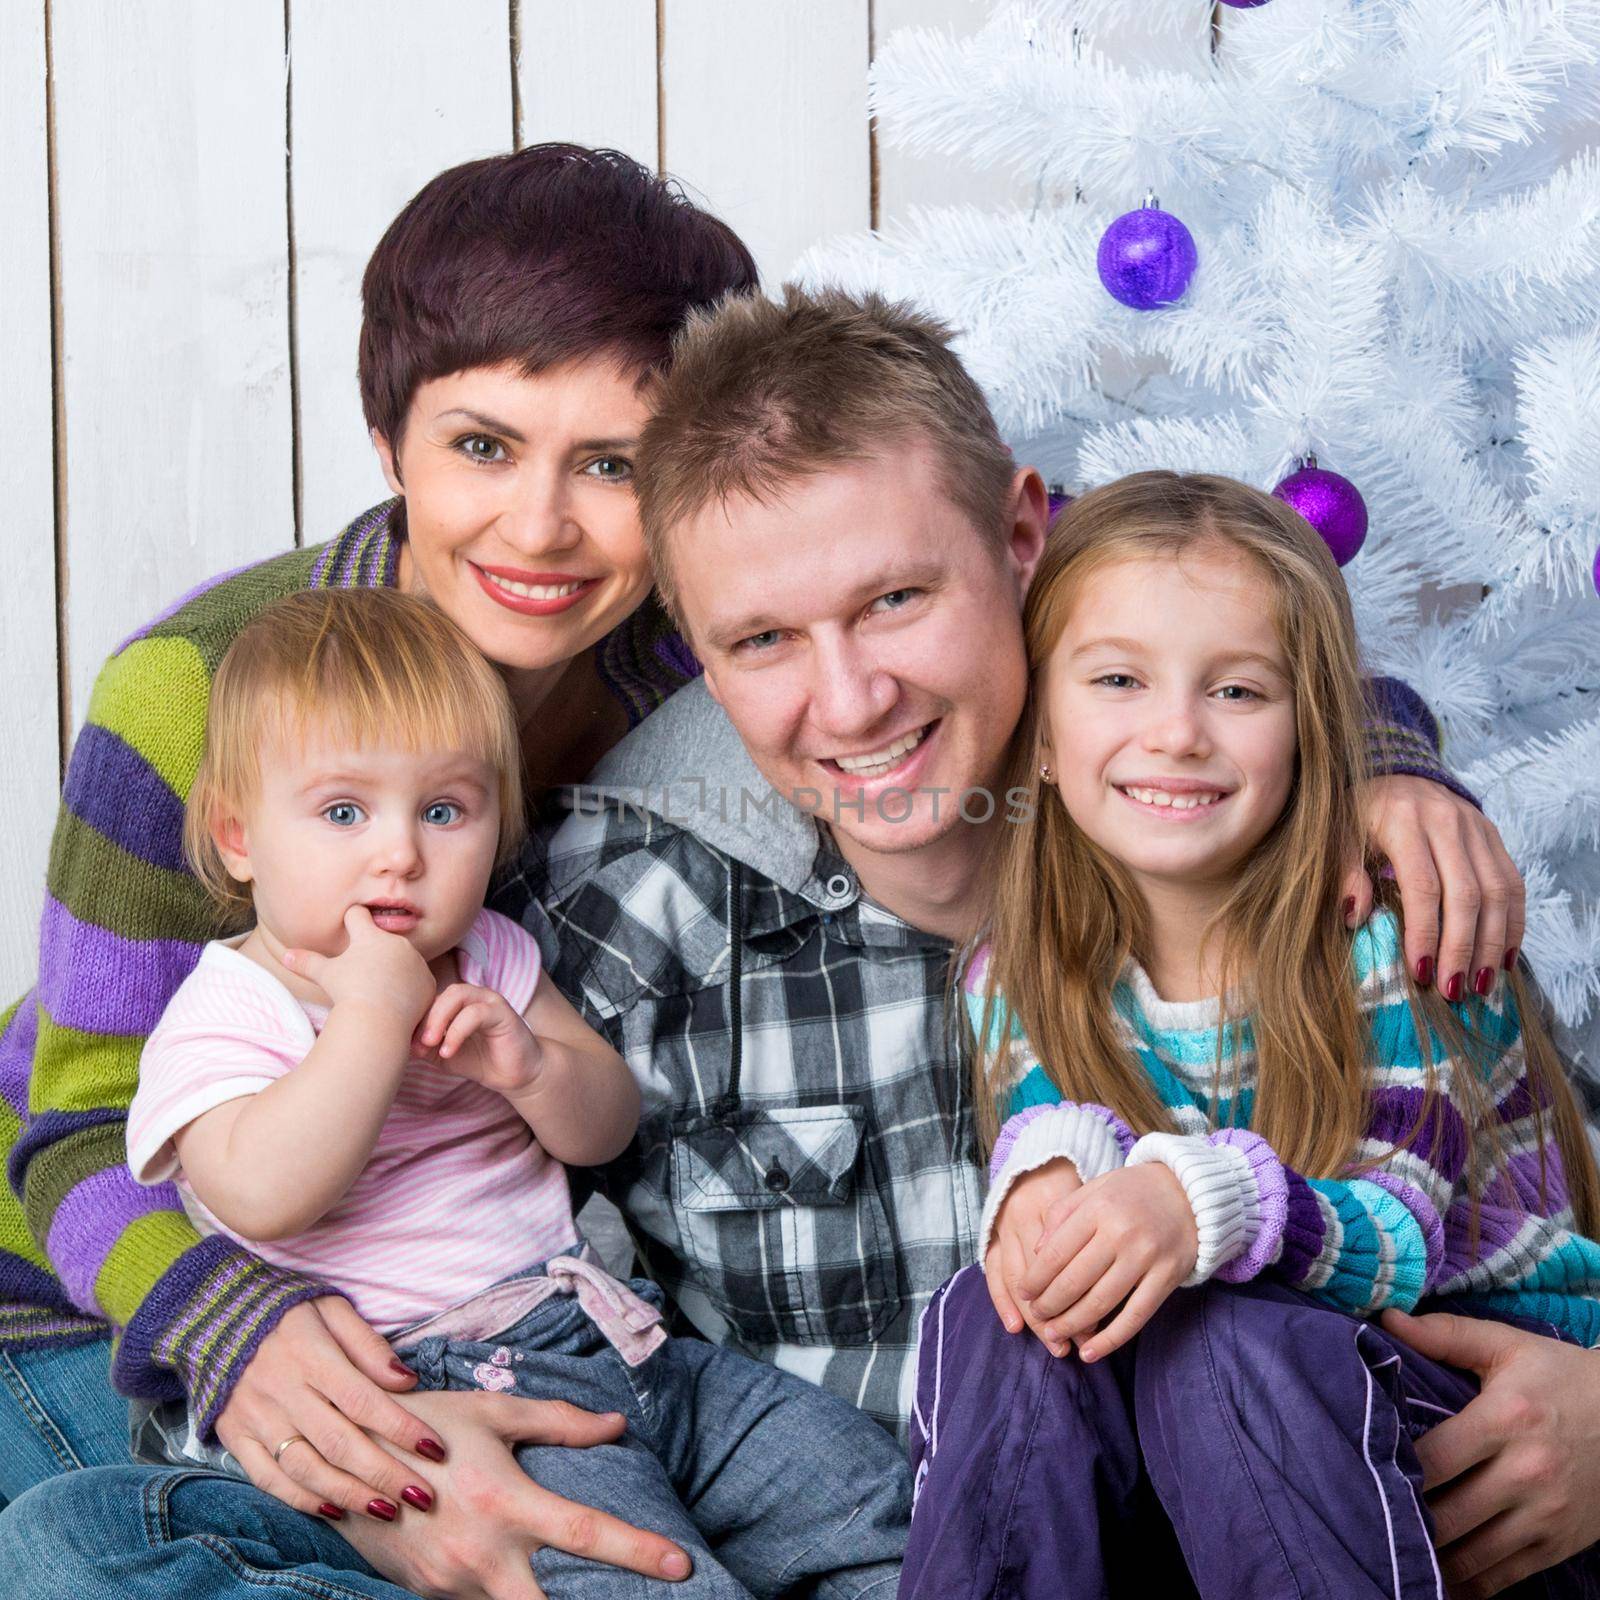 Christmas photo of a happy family around a decorated Christmas tree